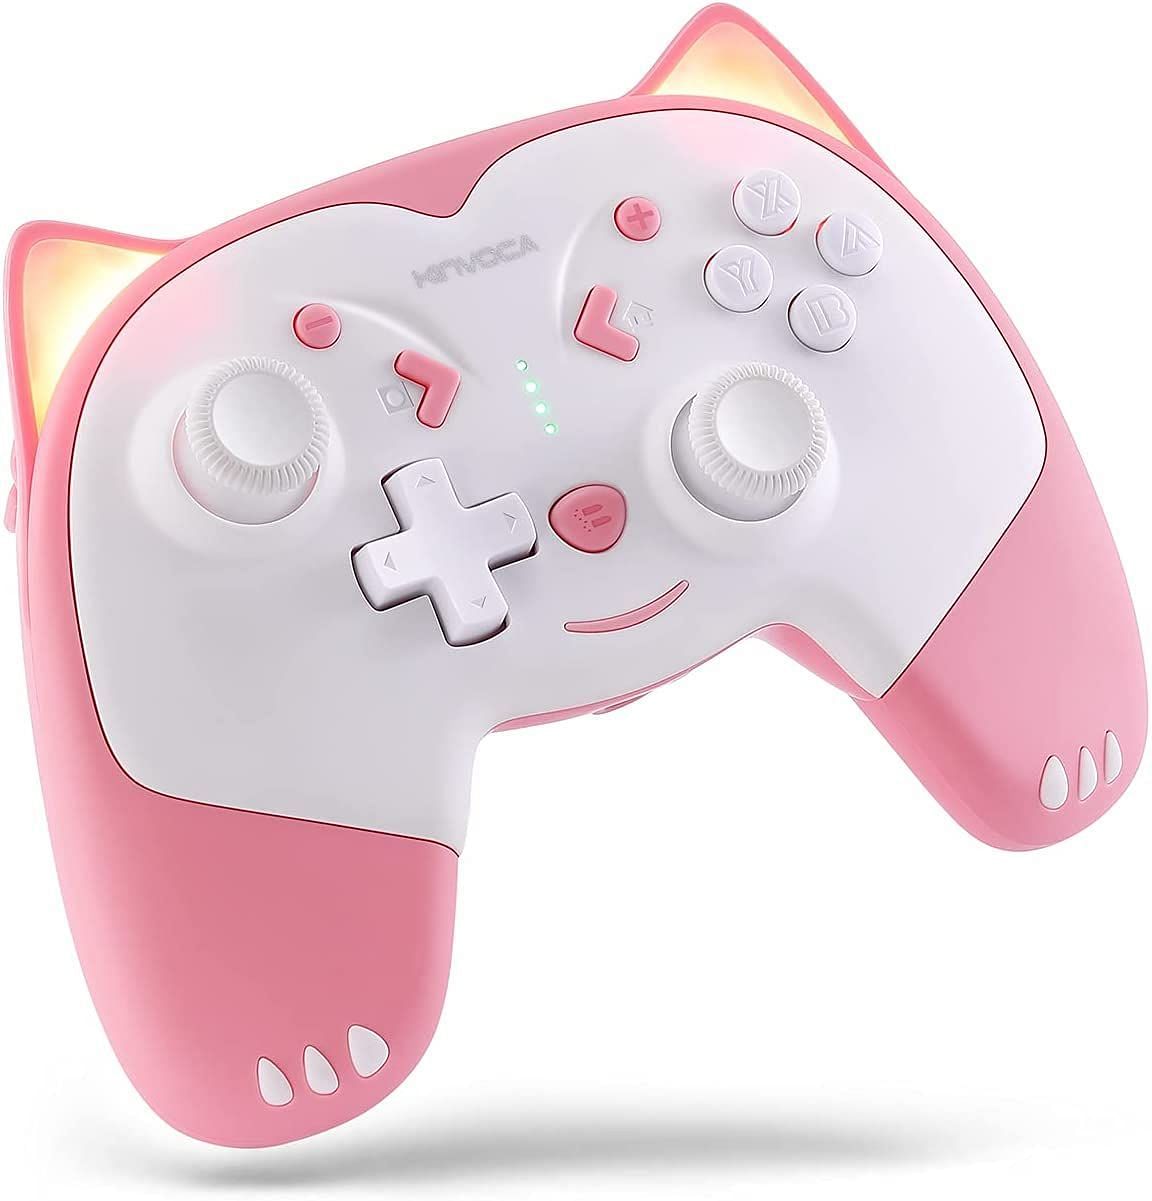 It is designed for Nintendo Switch that connects only wirelessly to a PC (Image via Amazon)